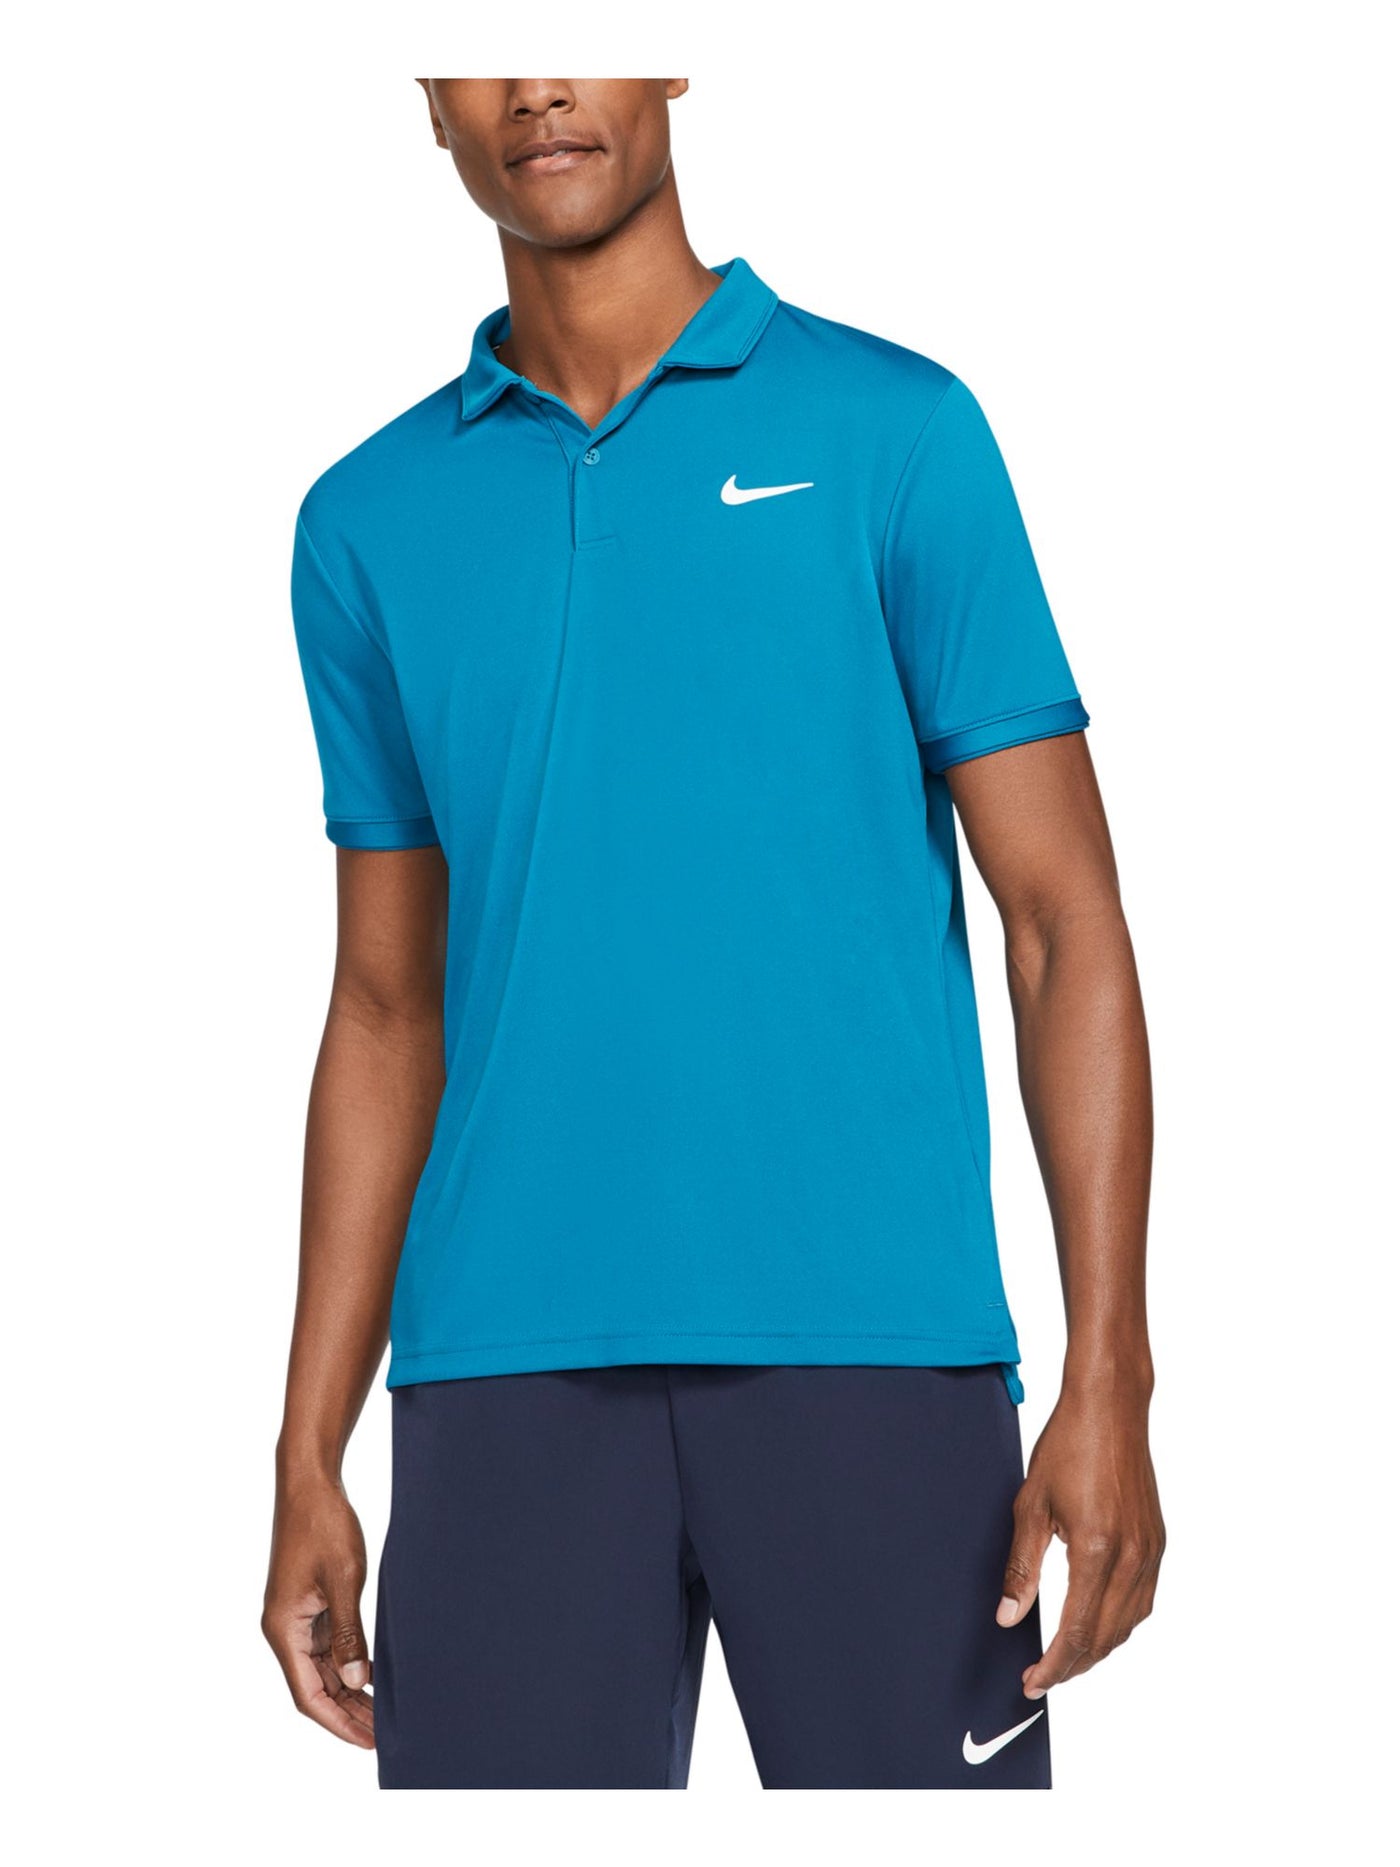 NIKE Mens Teal Logo Graphic Spread Collar Classic Fit Moisture Wicking Moisture Wicking Shirt S